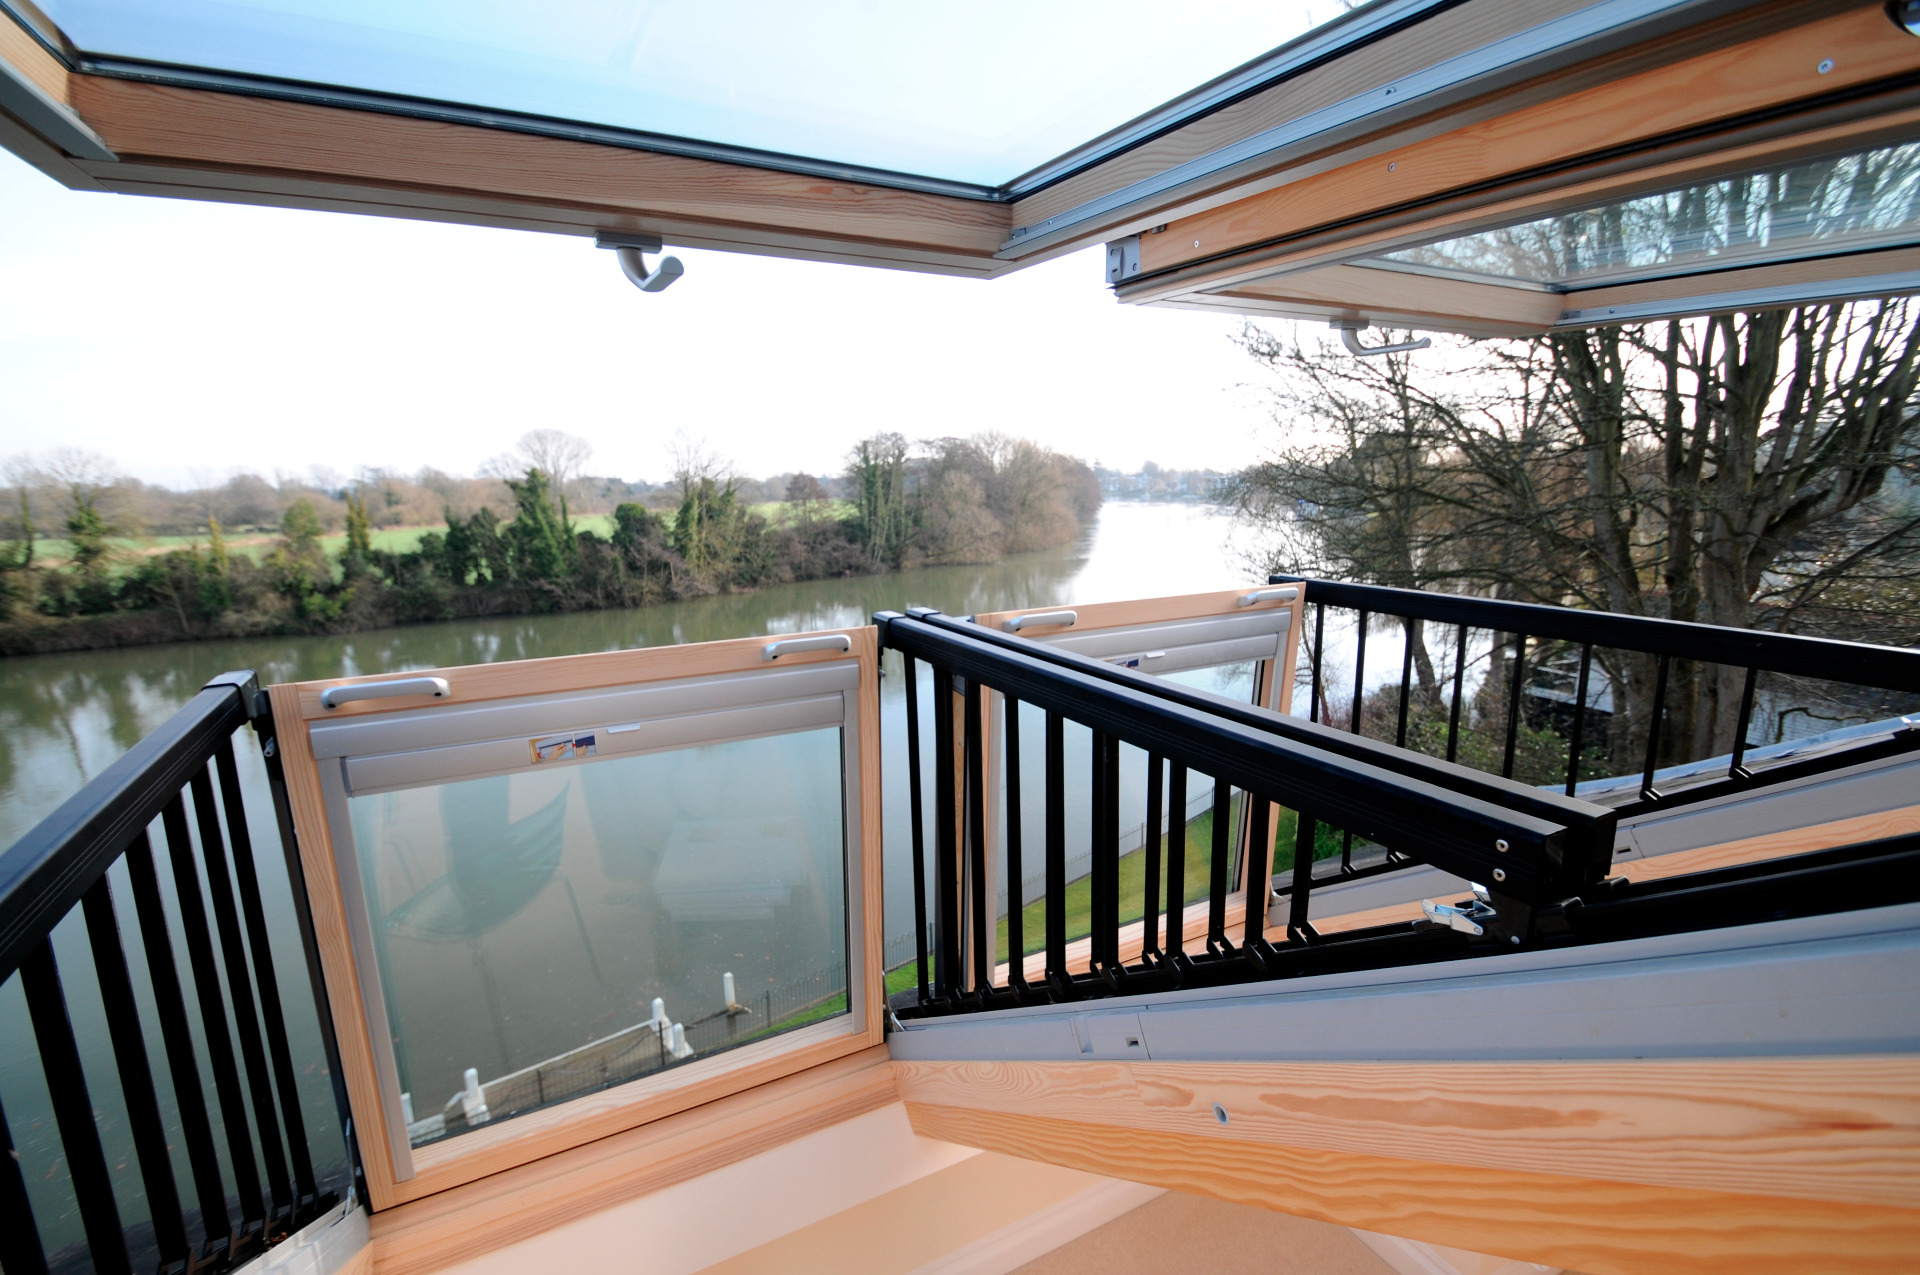 Cabrio Balcony Velux roof window in loft conversion, Thames